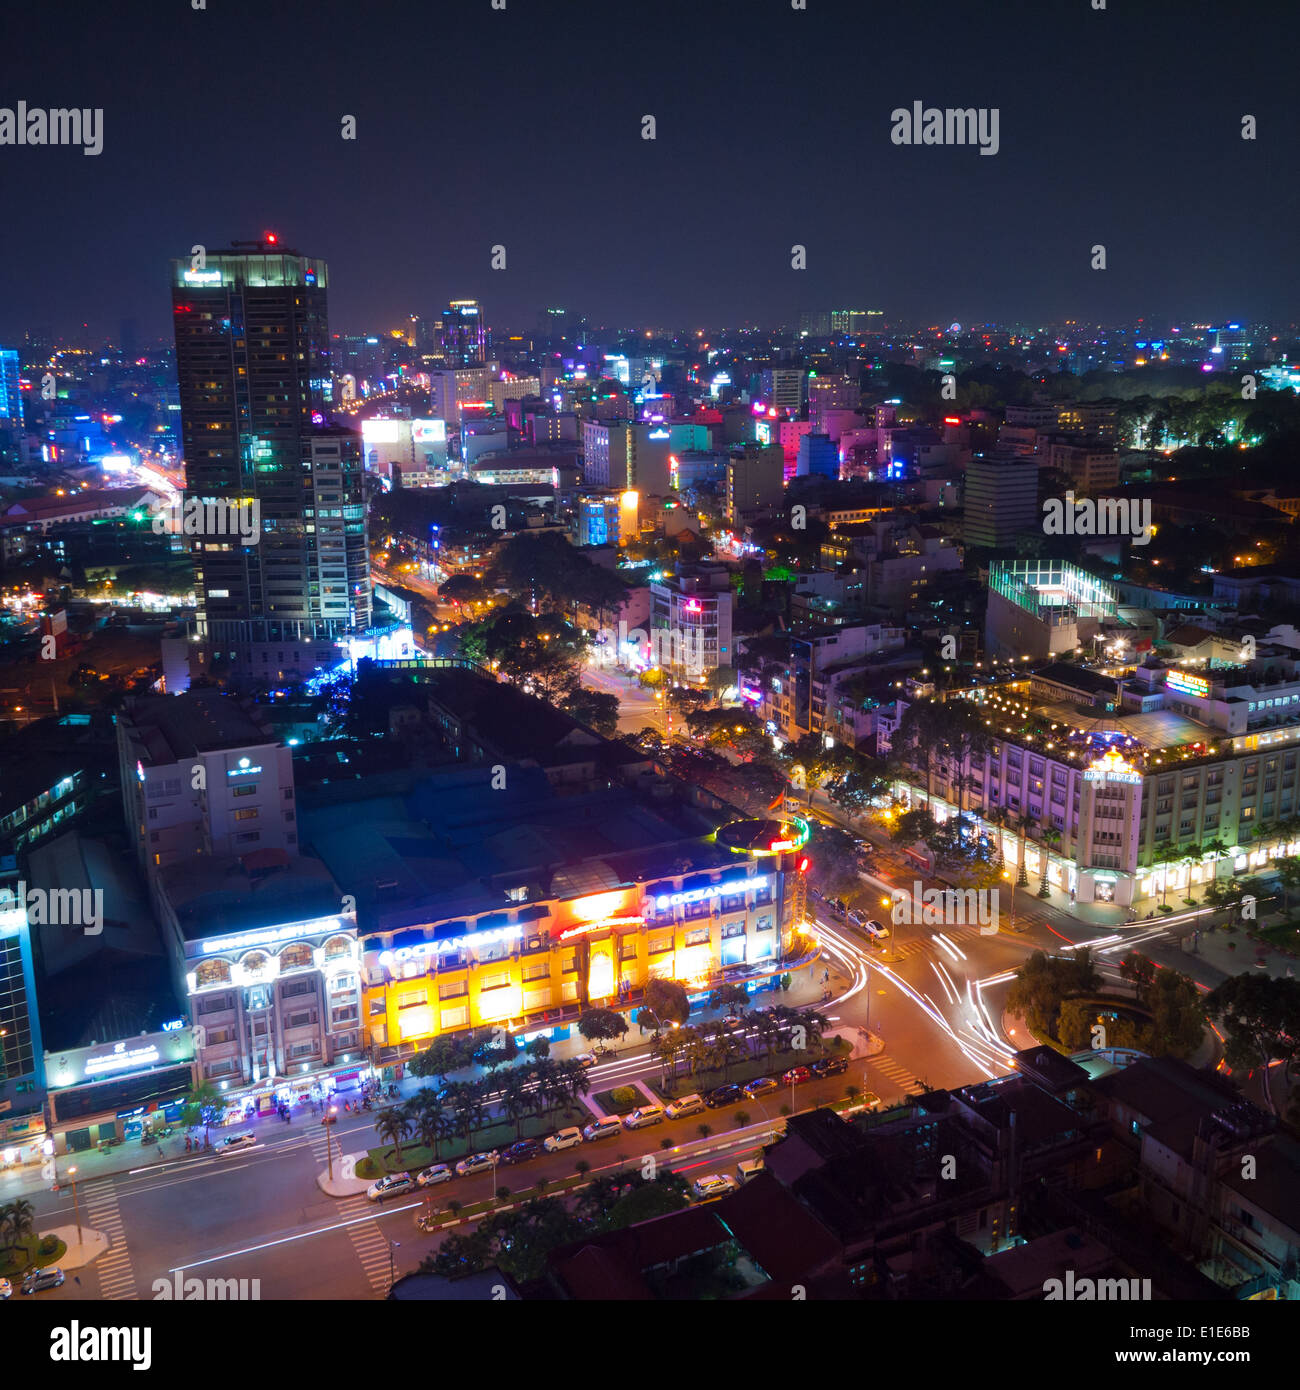 An aerial night view of District 1 in Ho Chi Minh City (Saigon), Vietnam. Stock Photo